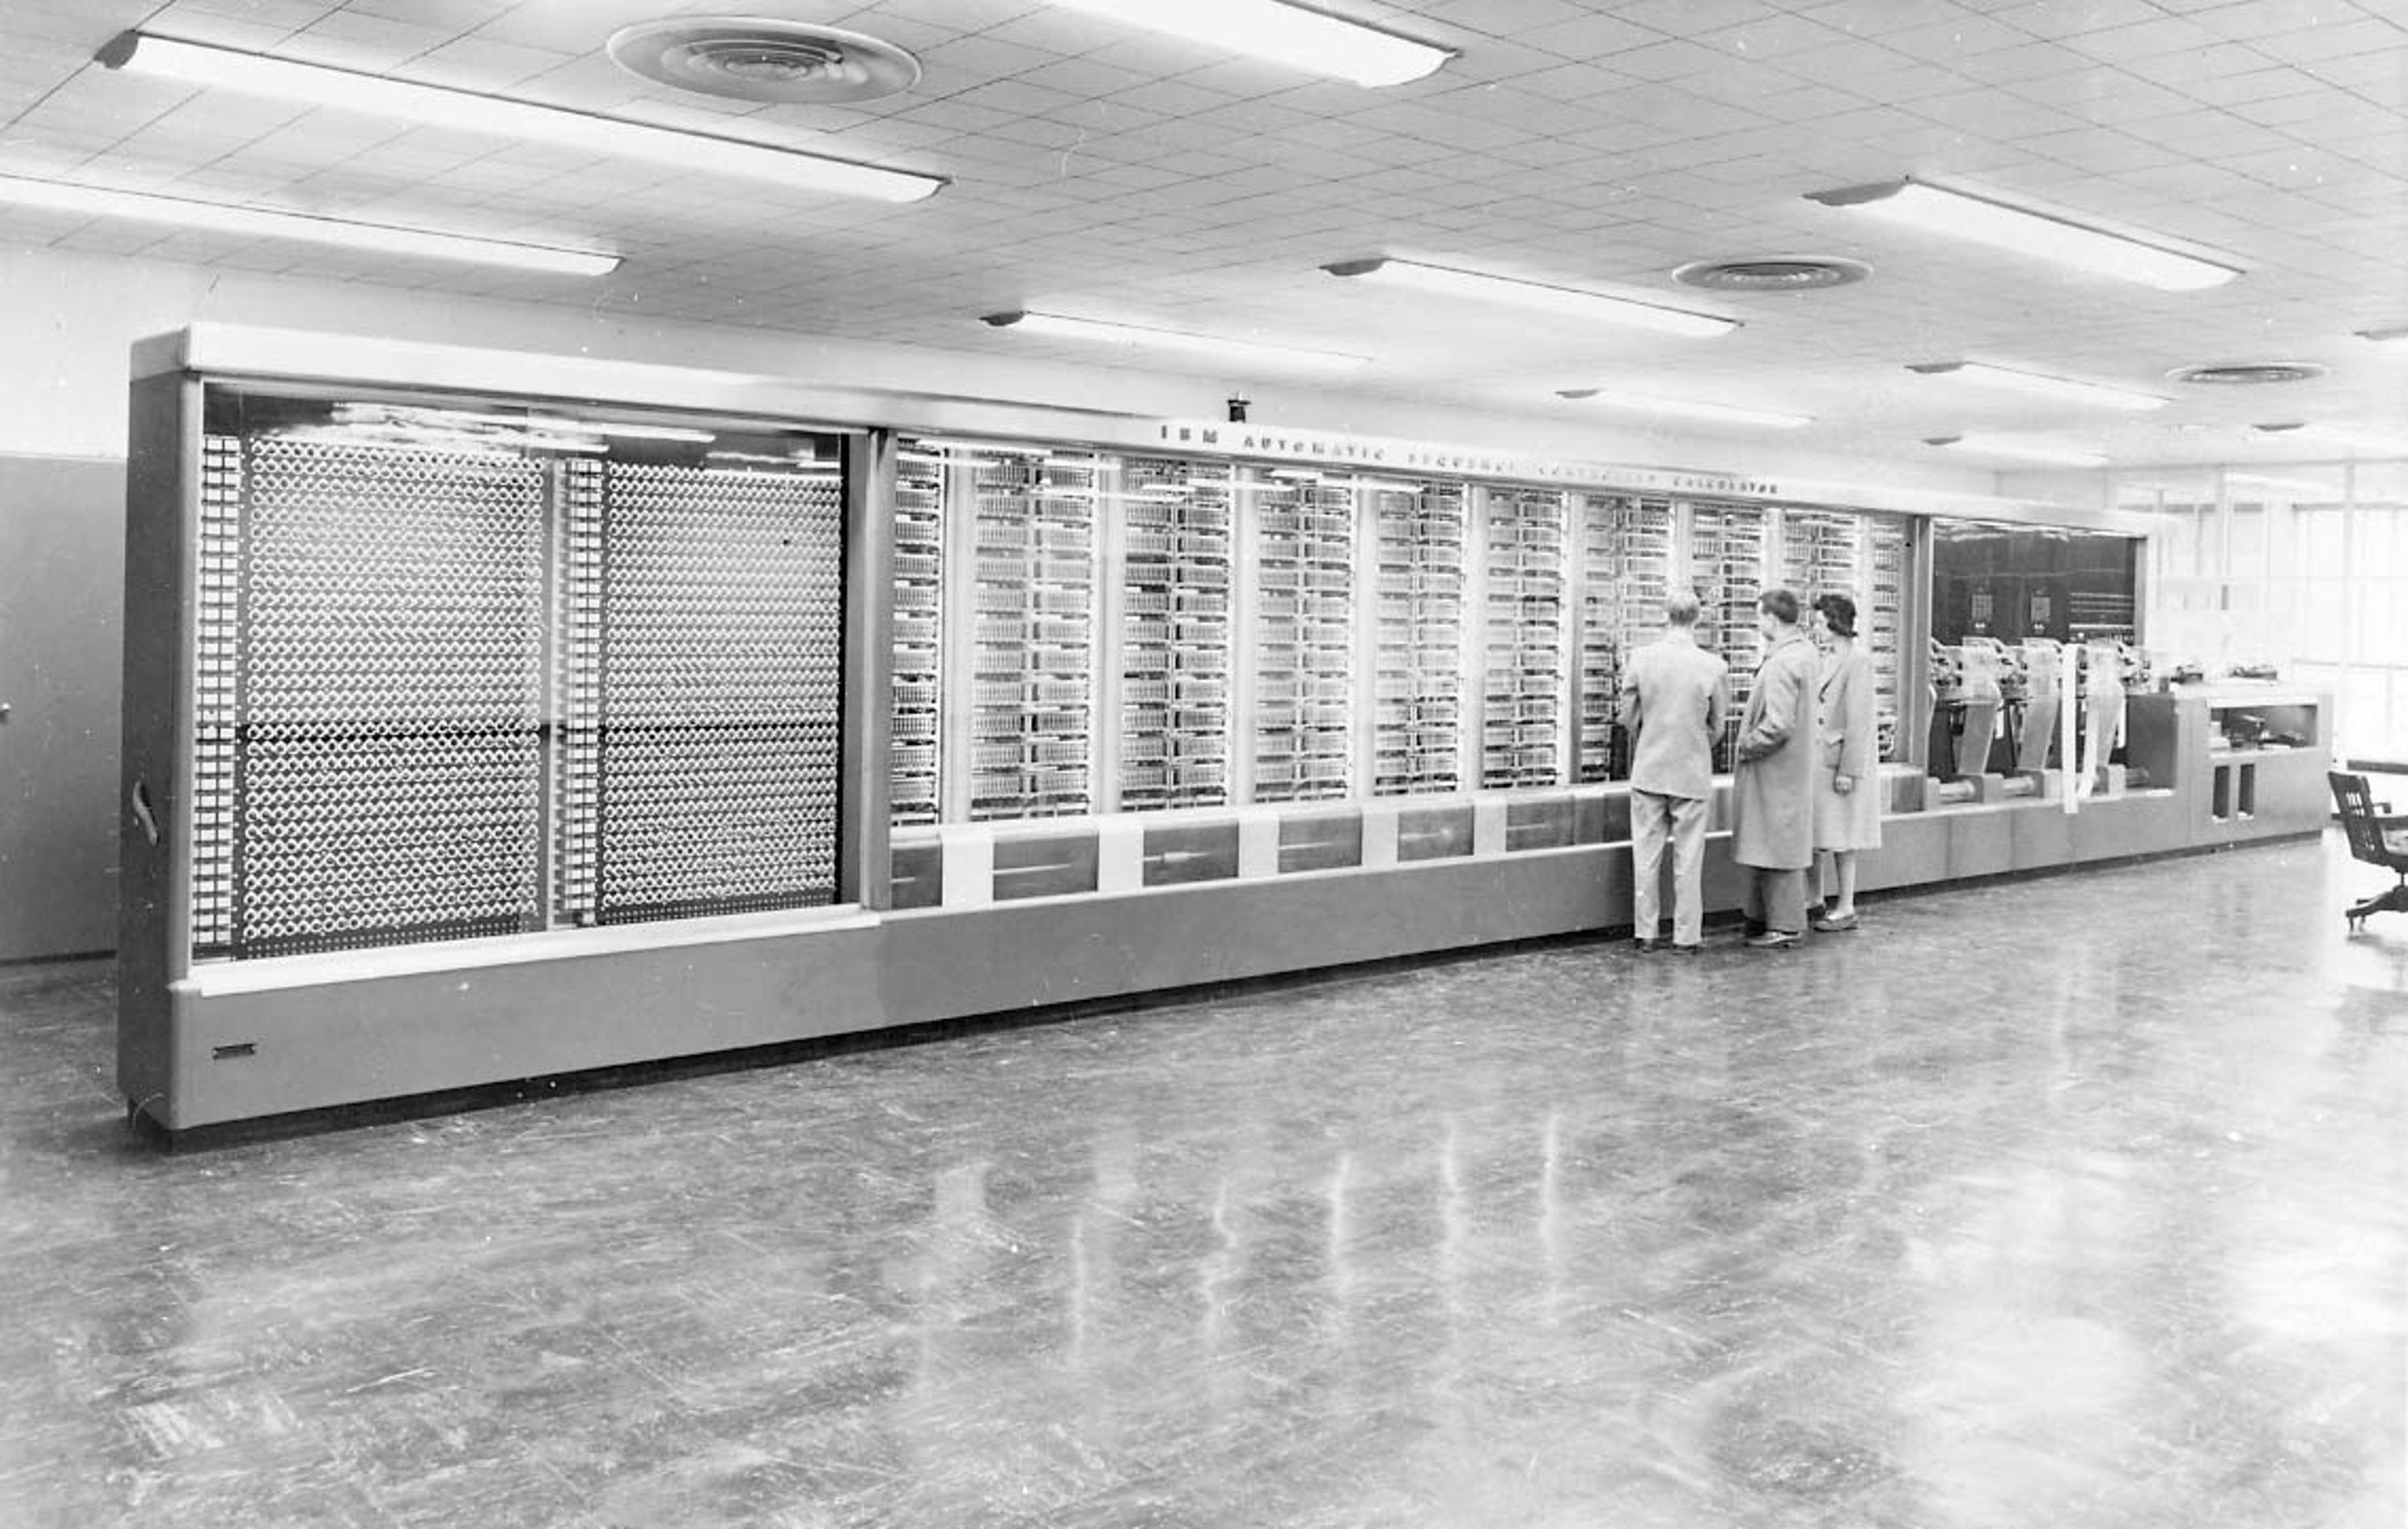 Harvard Mark I, an early computer that takes up an entire wall in a large room. There are three people in front of it, investigating missile ballistics data.